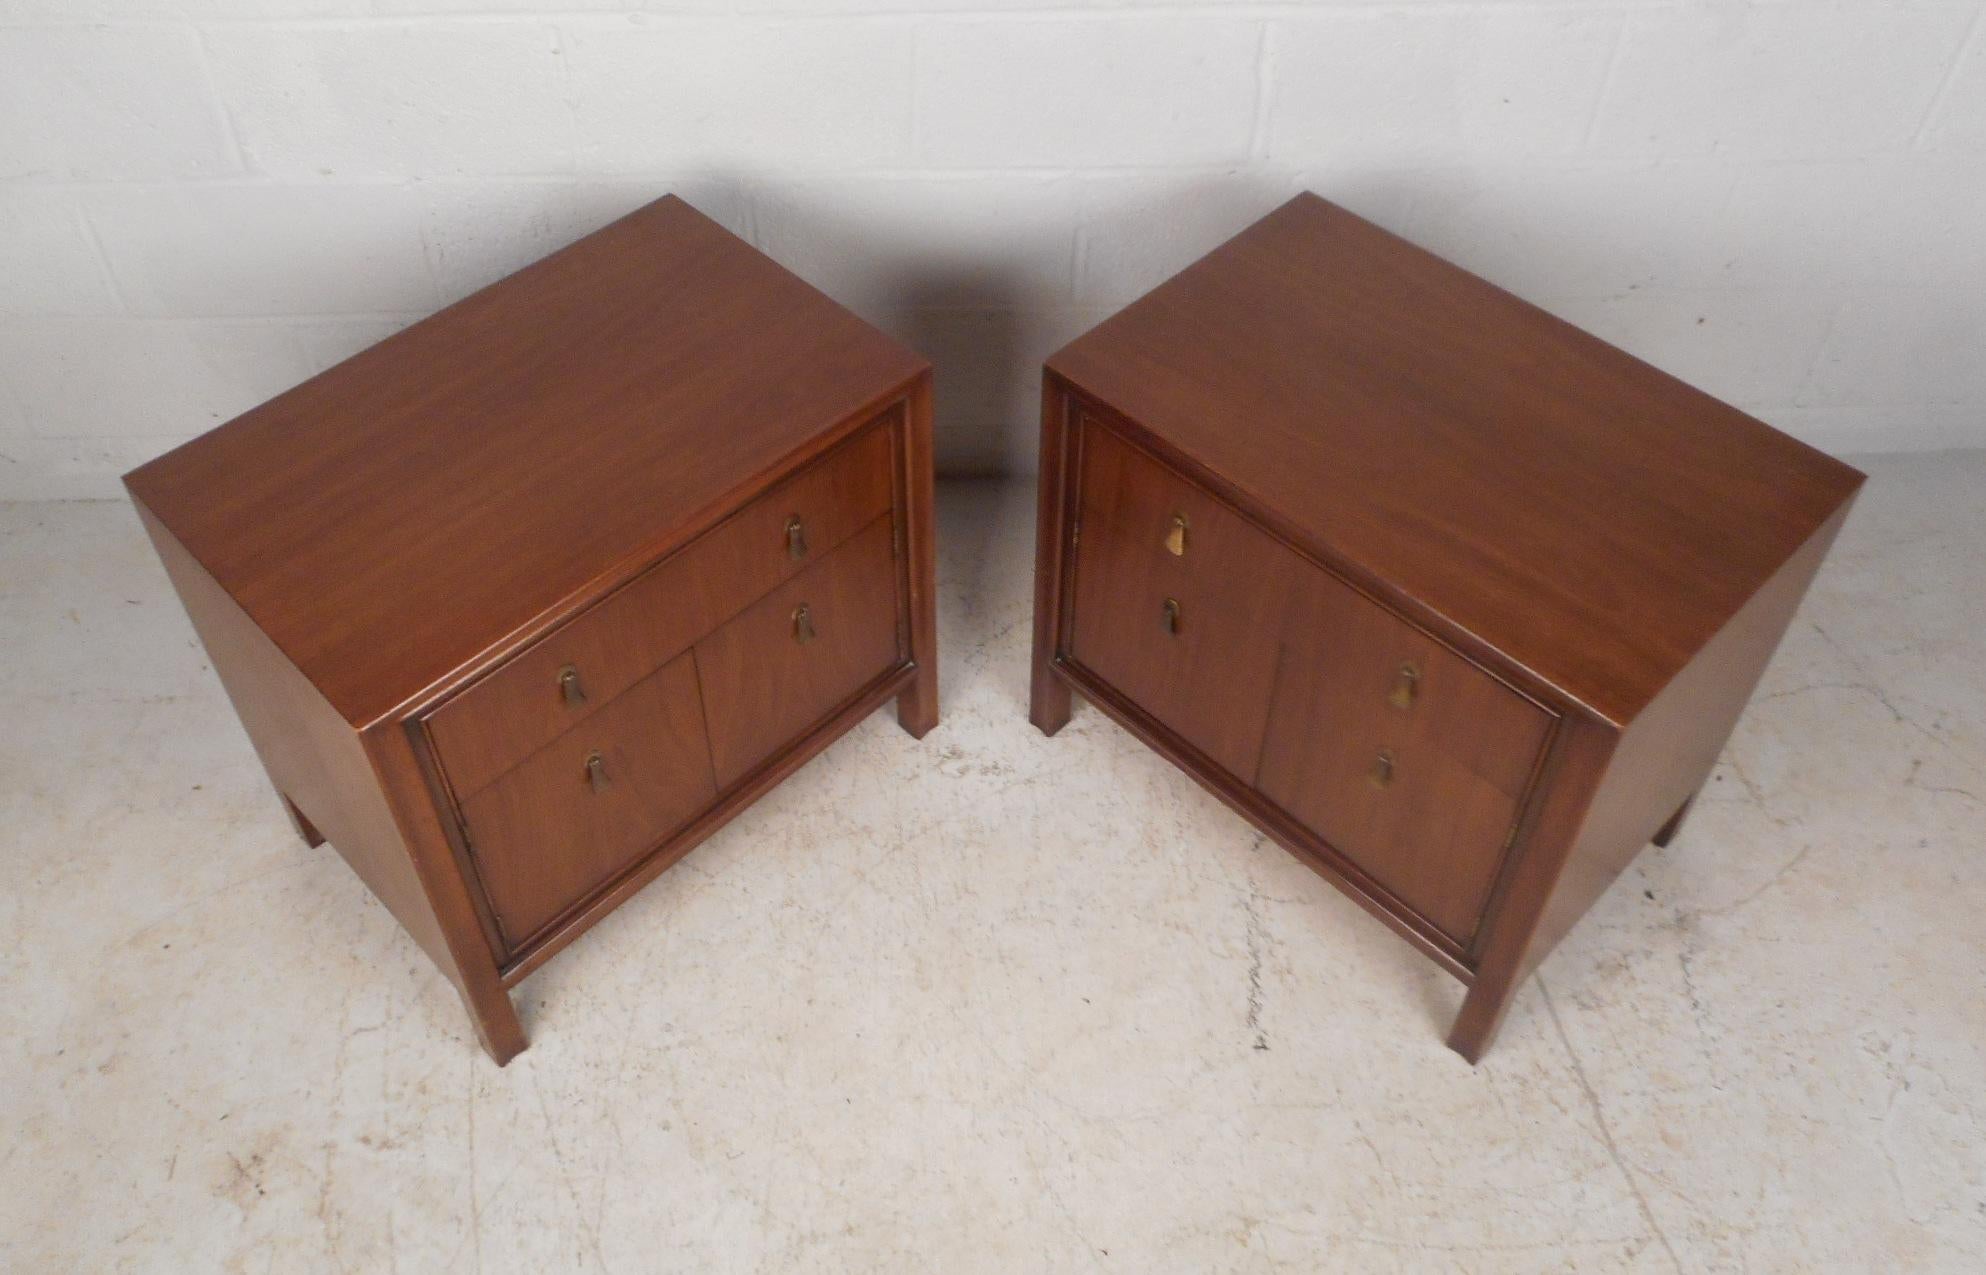 This beautiful pair of Mid-Century Modern nightstands boast unique hanging brass pulls and a dark vintage walnut finish. A stylish design that provides ample space for storage within its hefty drawer and large compartment. Quality craftsmanship with